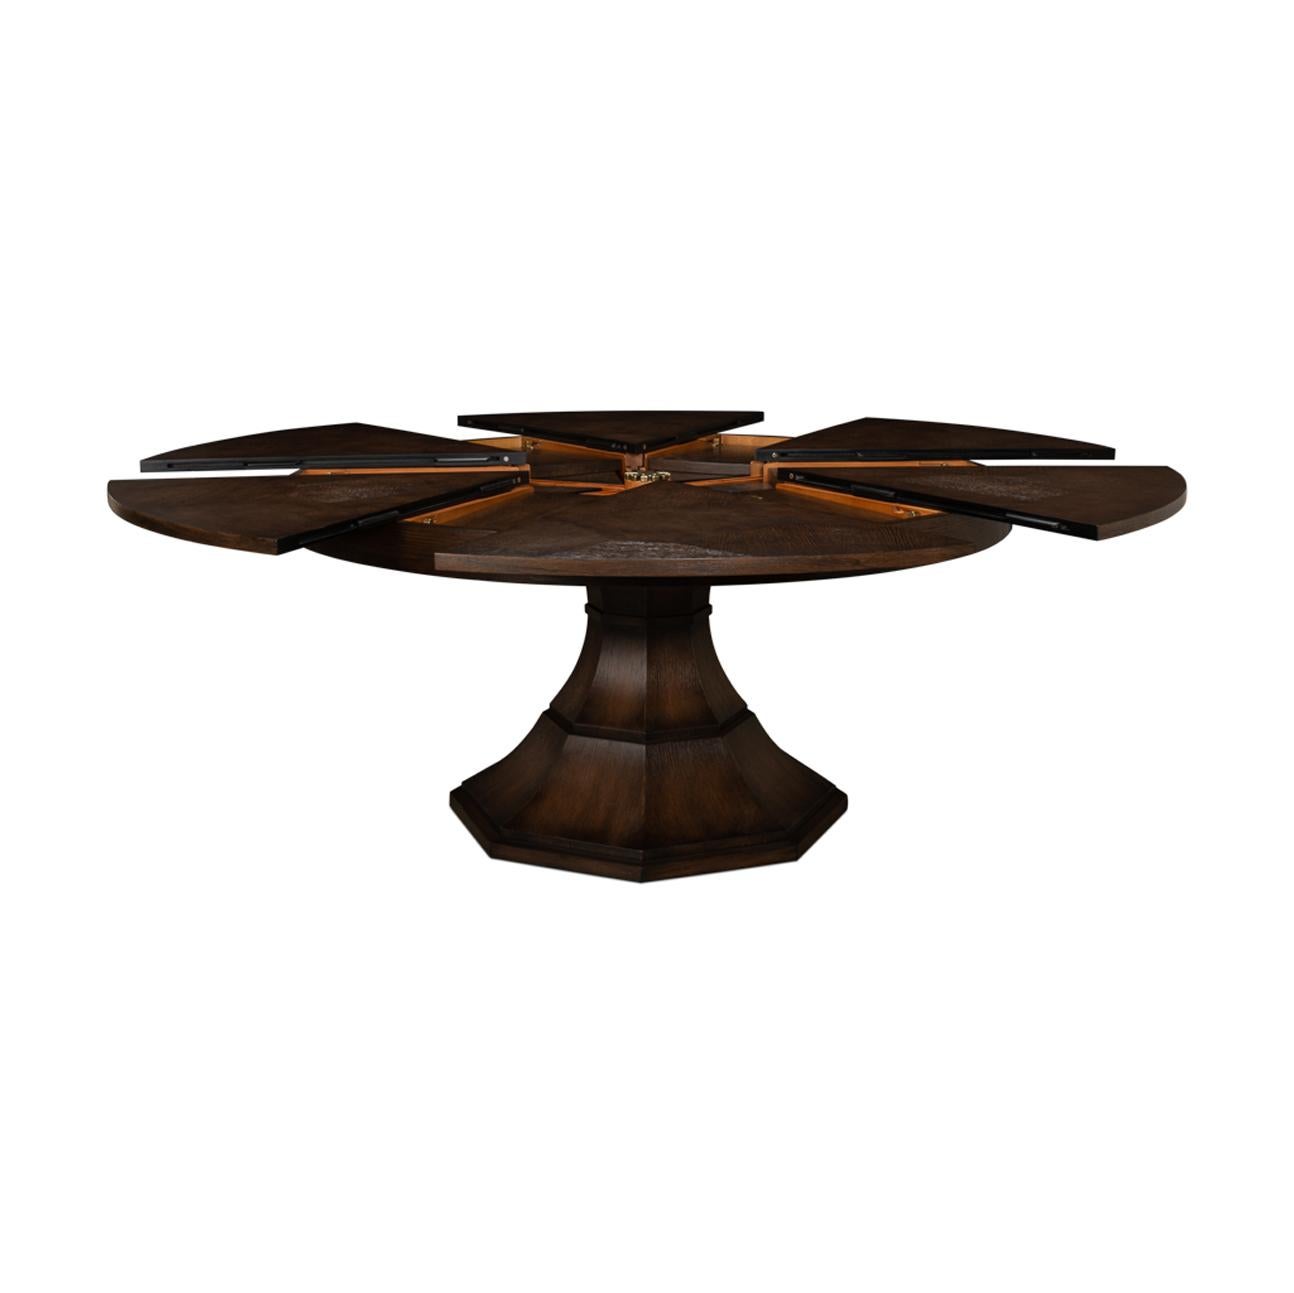 Modern round oak veneered extension Dining Table in a unique burnt brown finish, with self-storing leaves, on a tapered column form pedestal base.

Open dimensions: 84